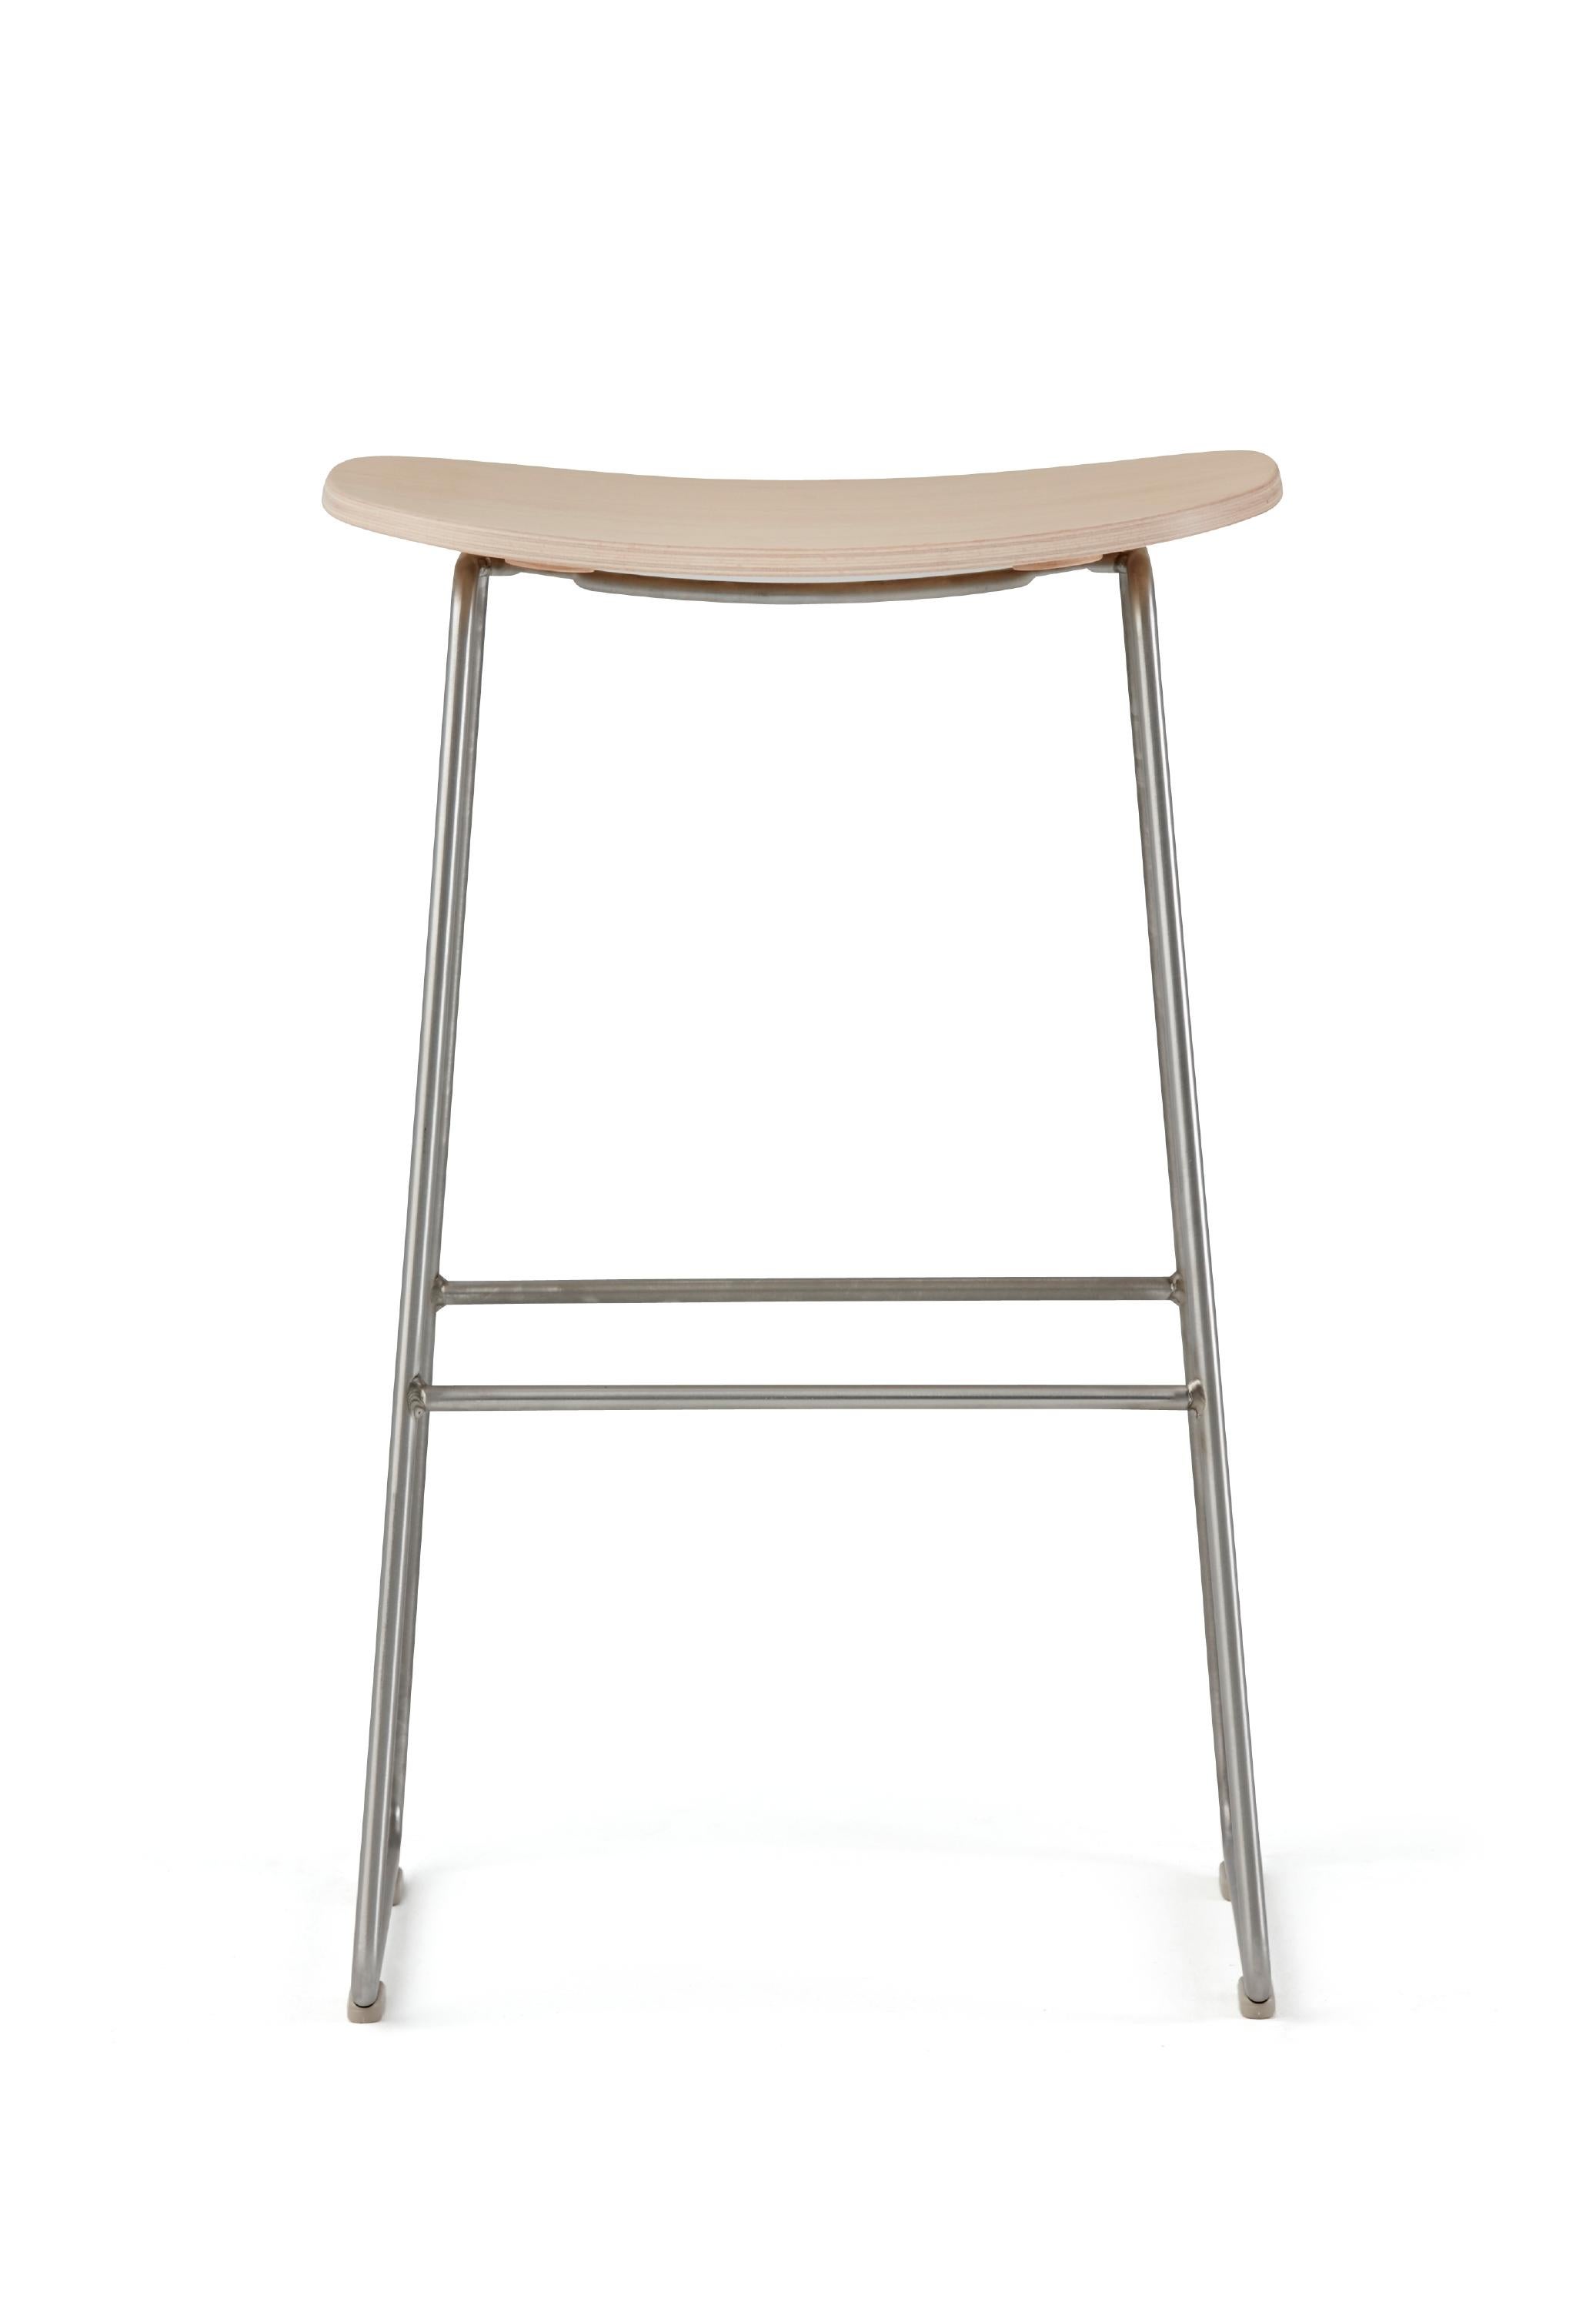 For Sale: Beige (113_Bleached Ash) Jasper Morrison Medium Morrison Stool in Ash and Fabric or Leather for